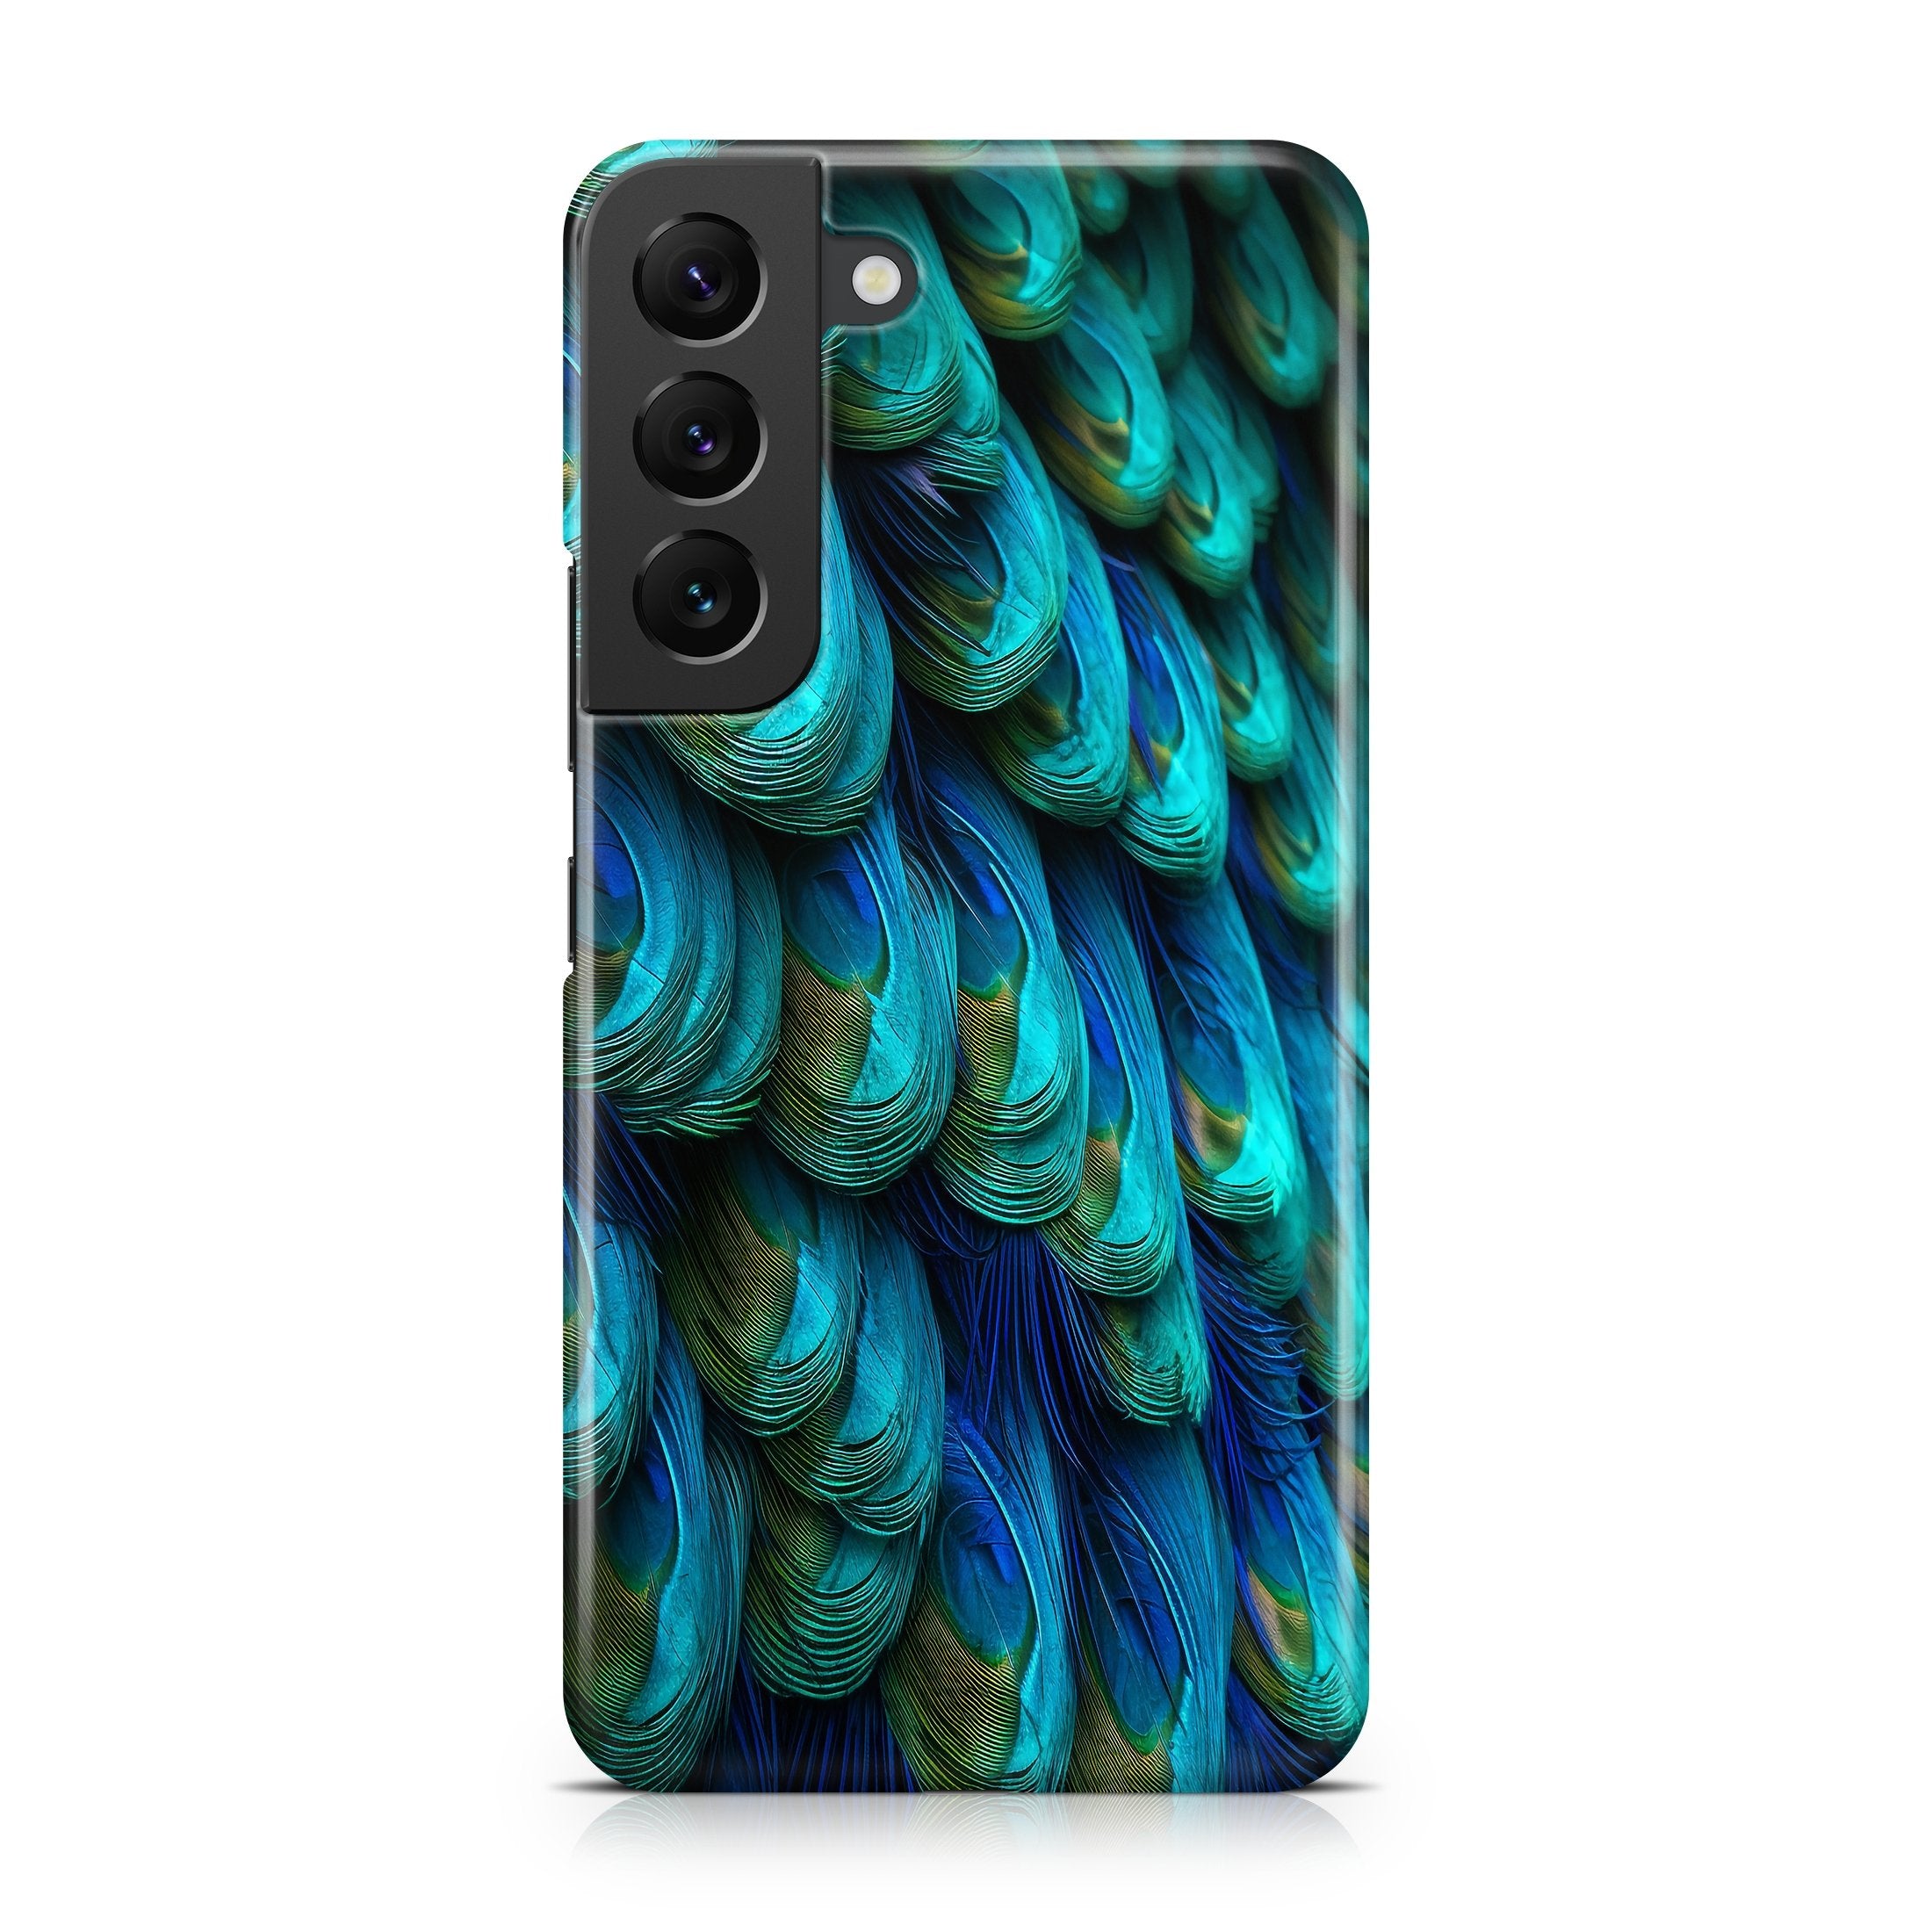 Specter Blue Dragonscale - Samsung phone case designs by CaseSwagger